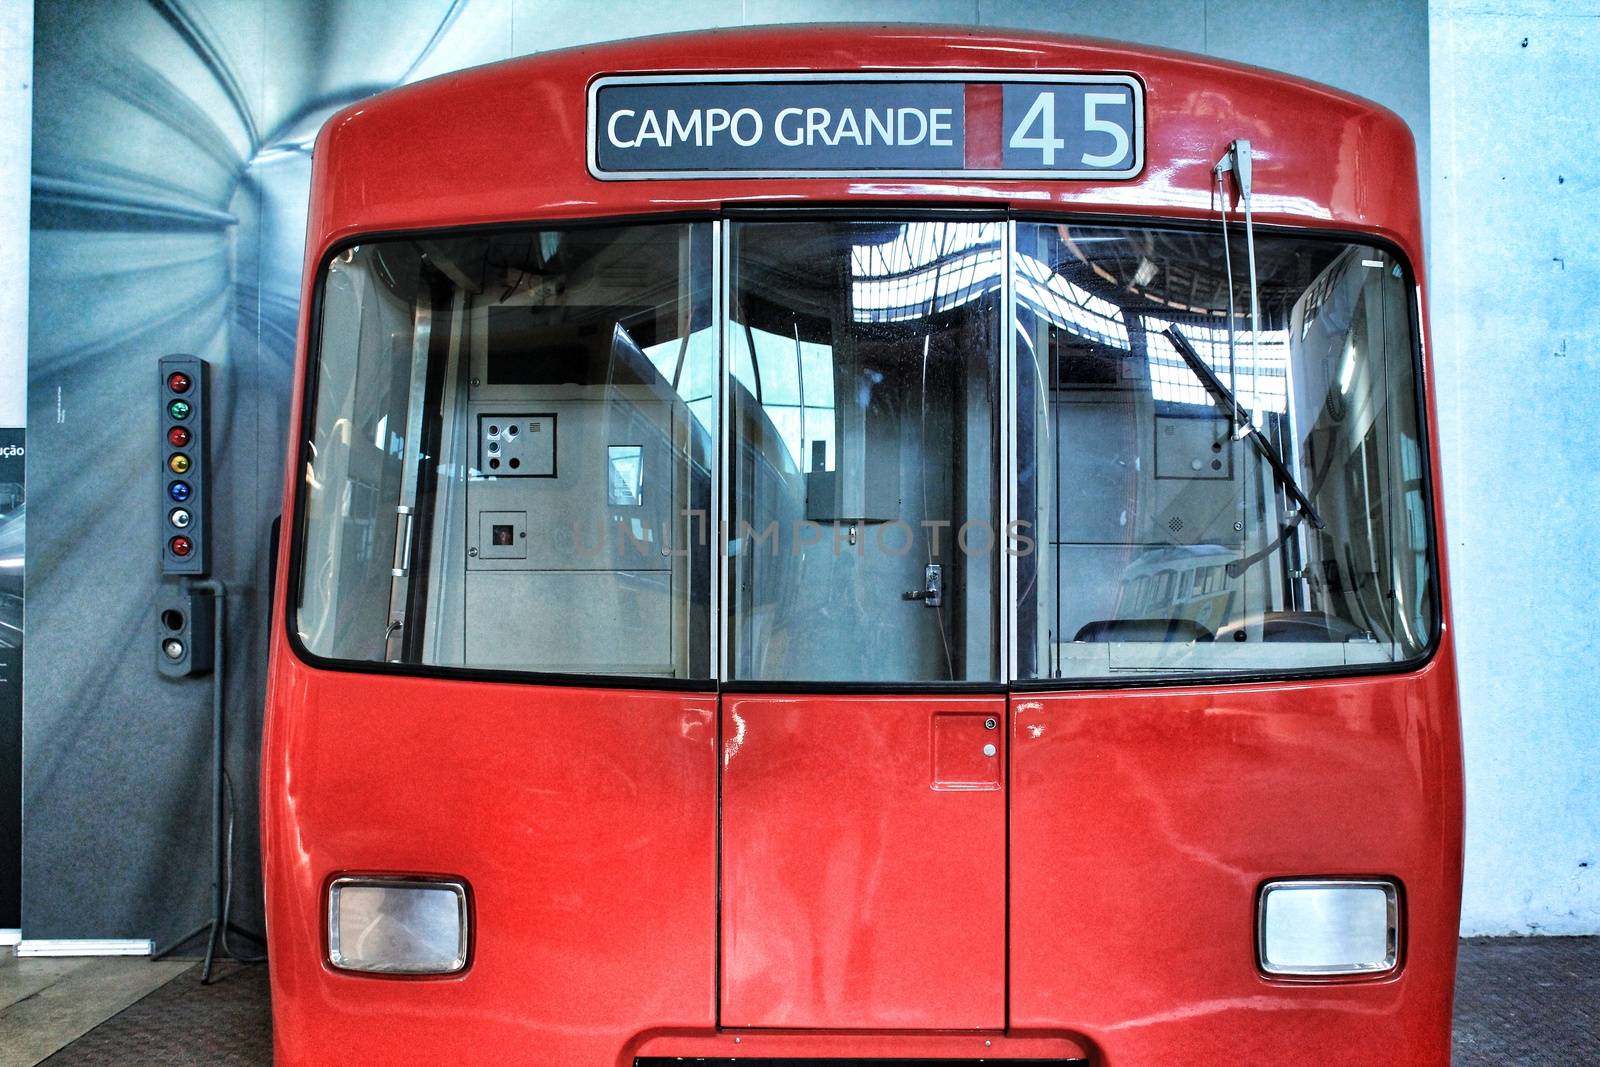 Reproduction of red subway cabin in Lisbon